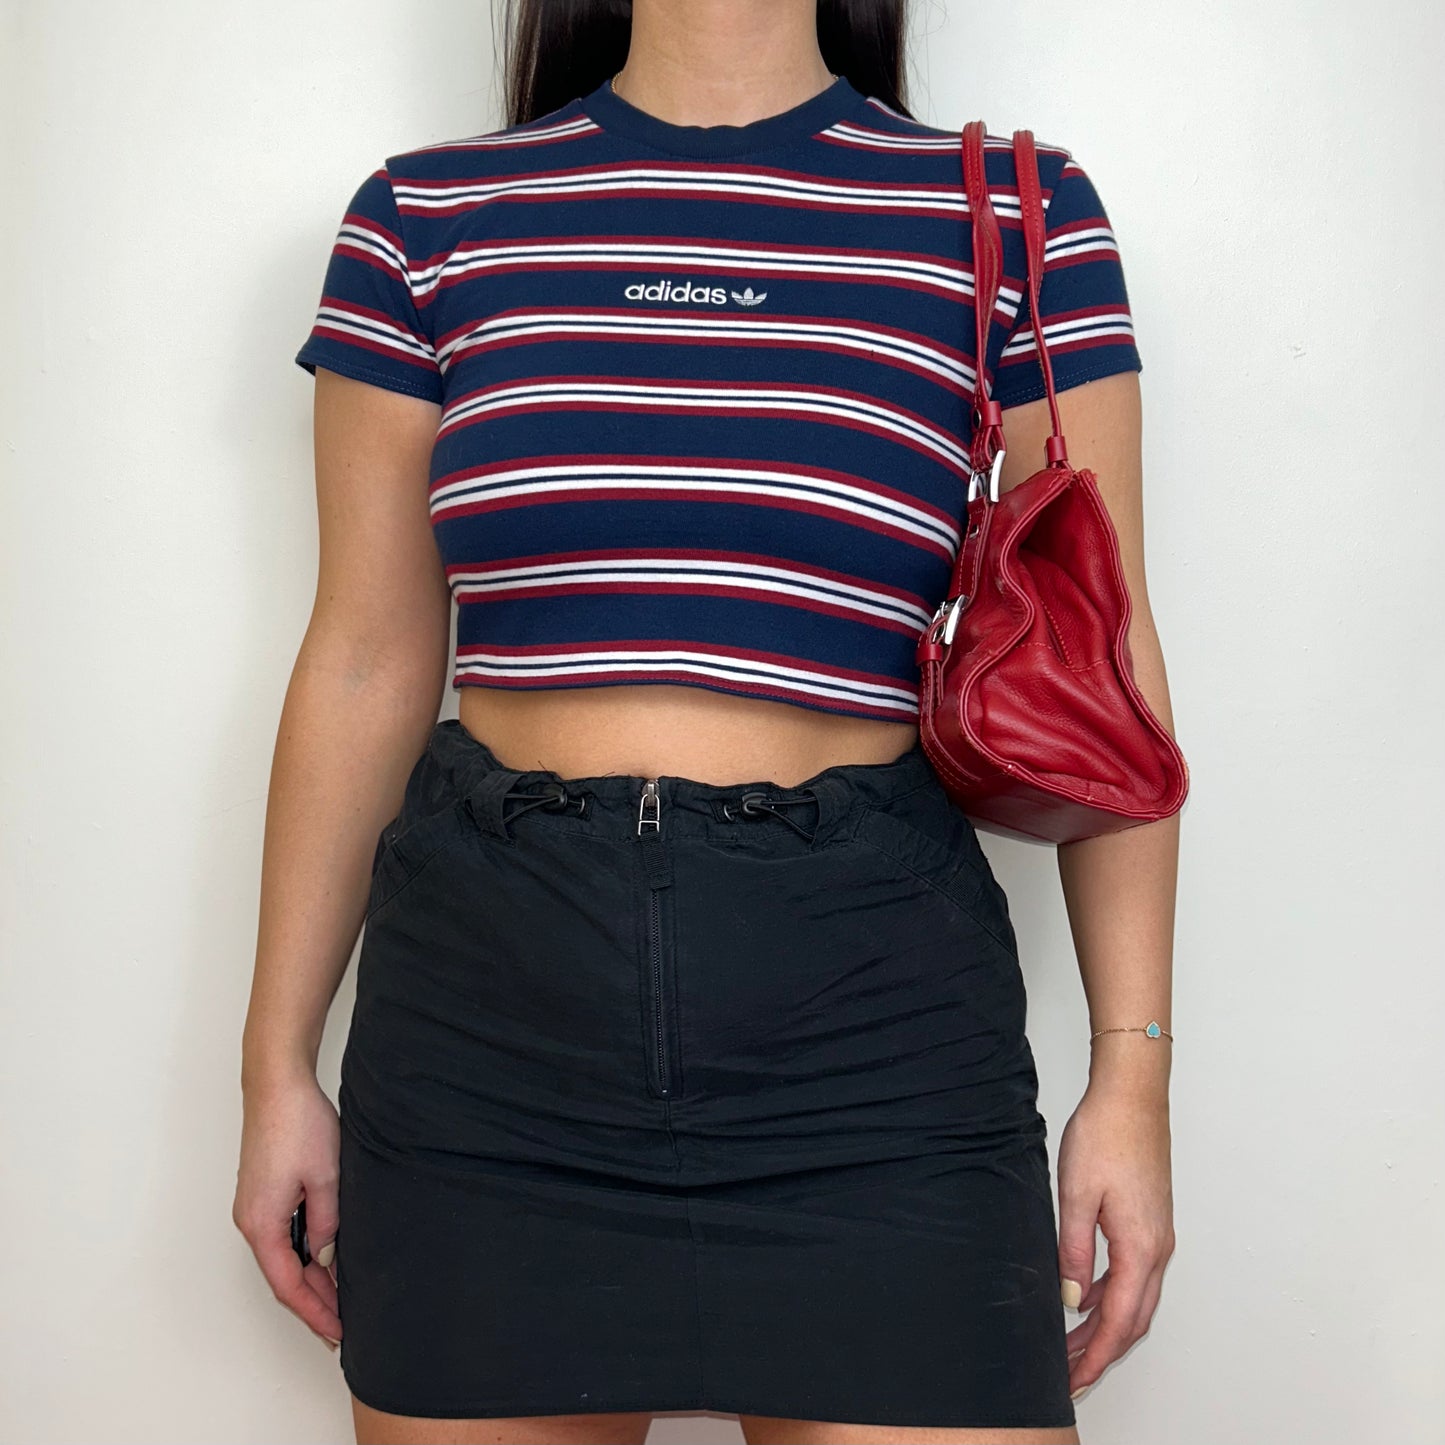 navy and red short sleeve crop top with white adidas logo shown on a model wearing a black mini skirt and red shoulder bag